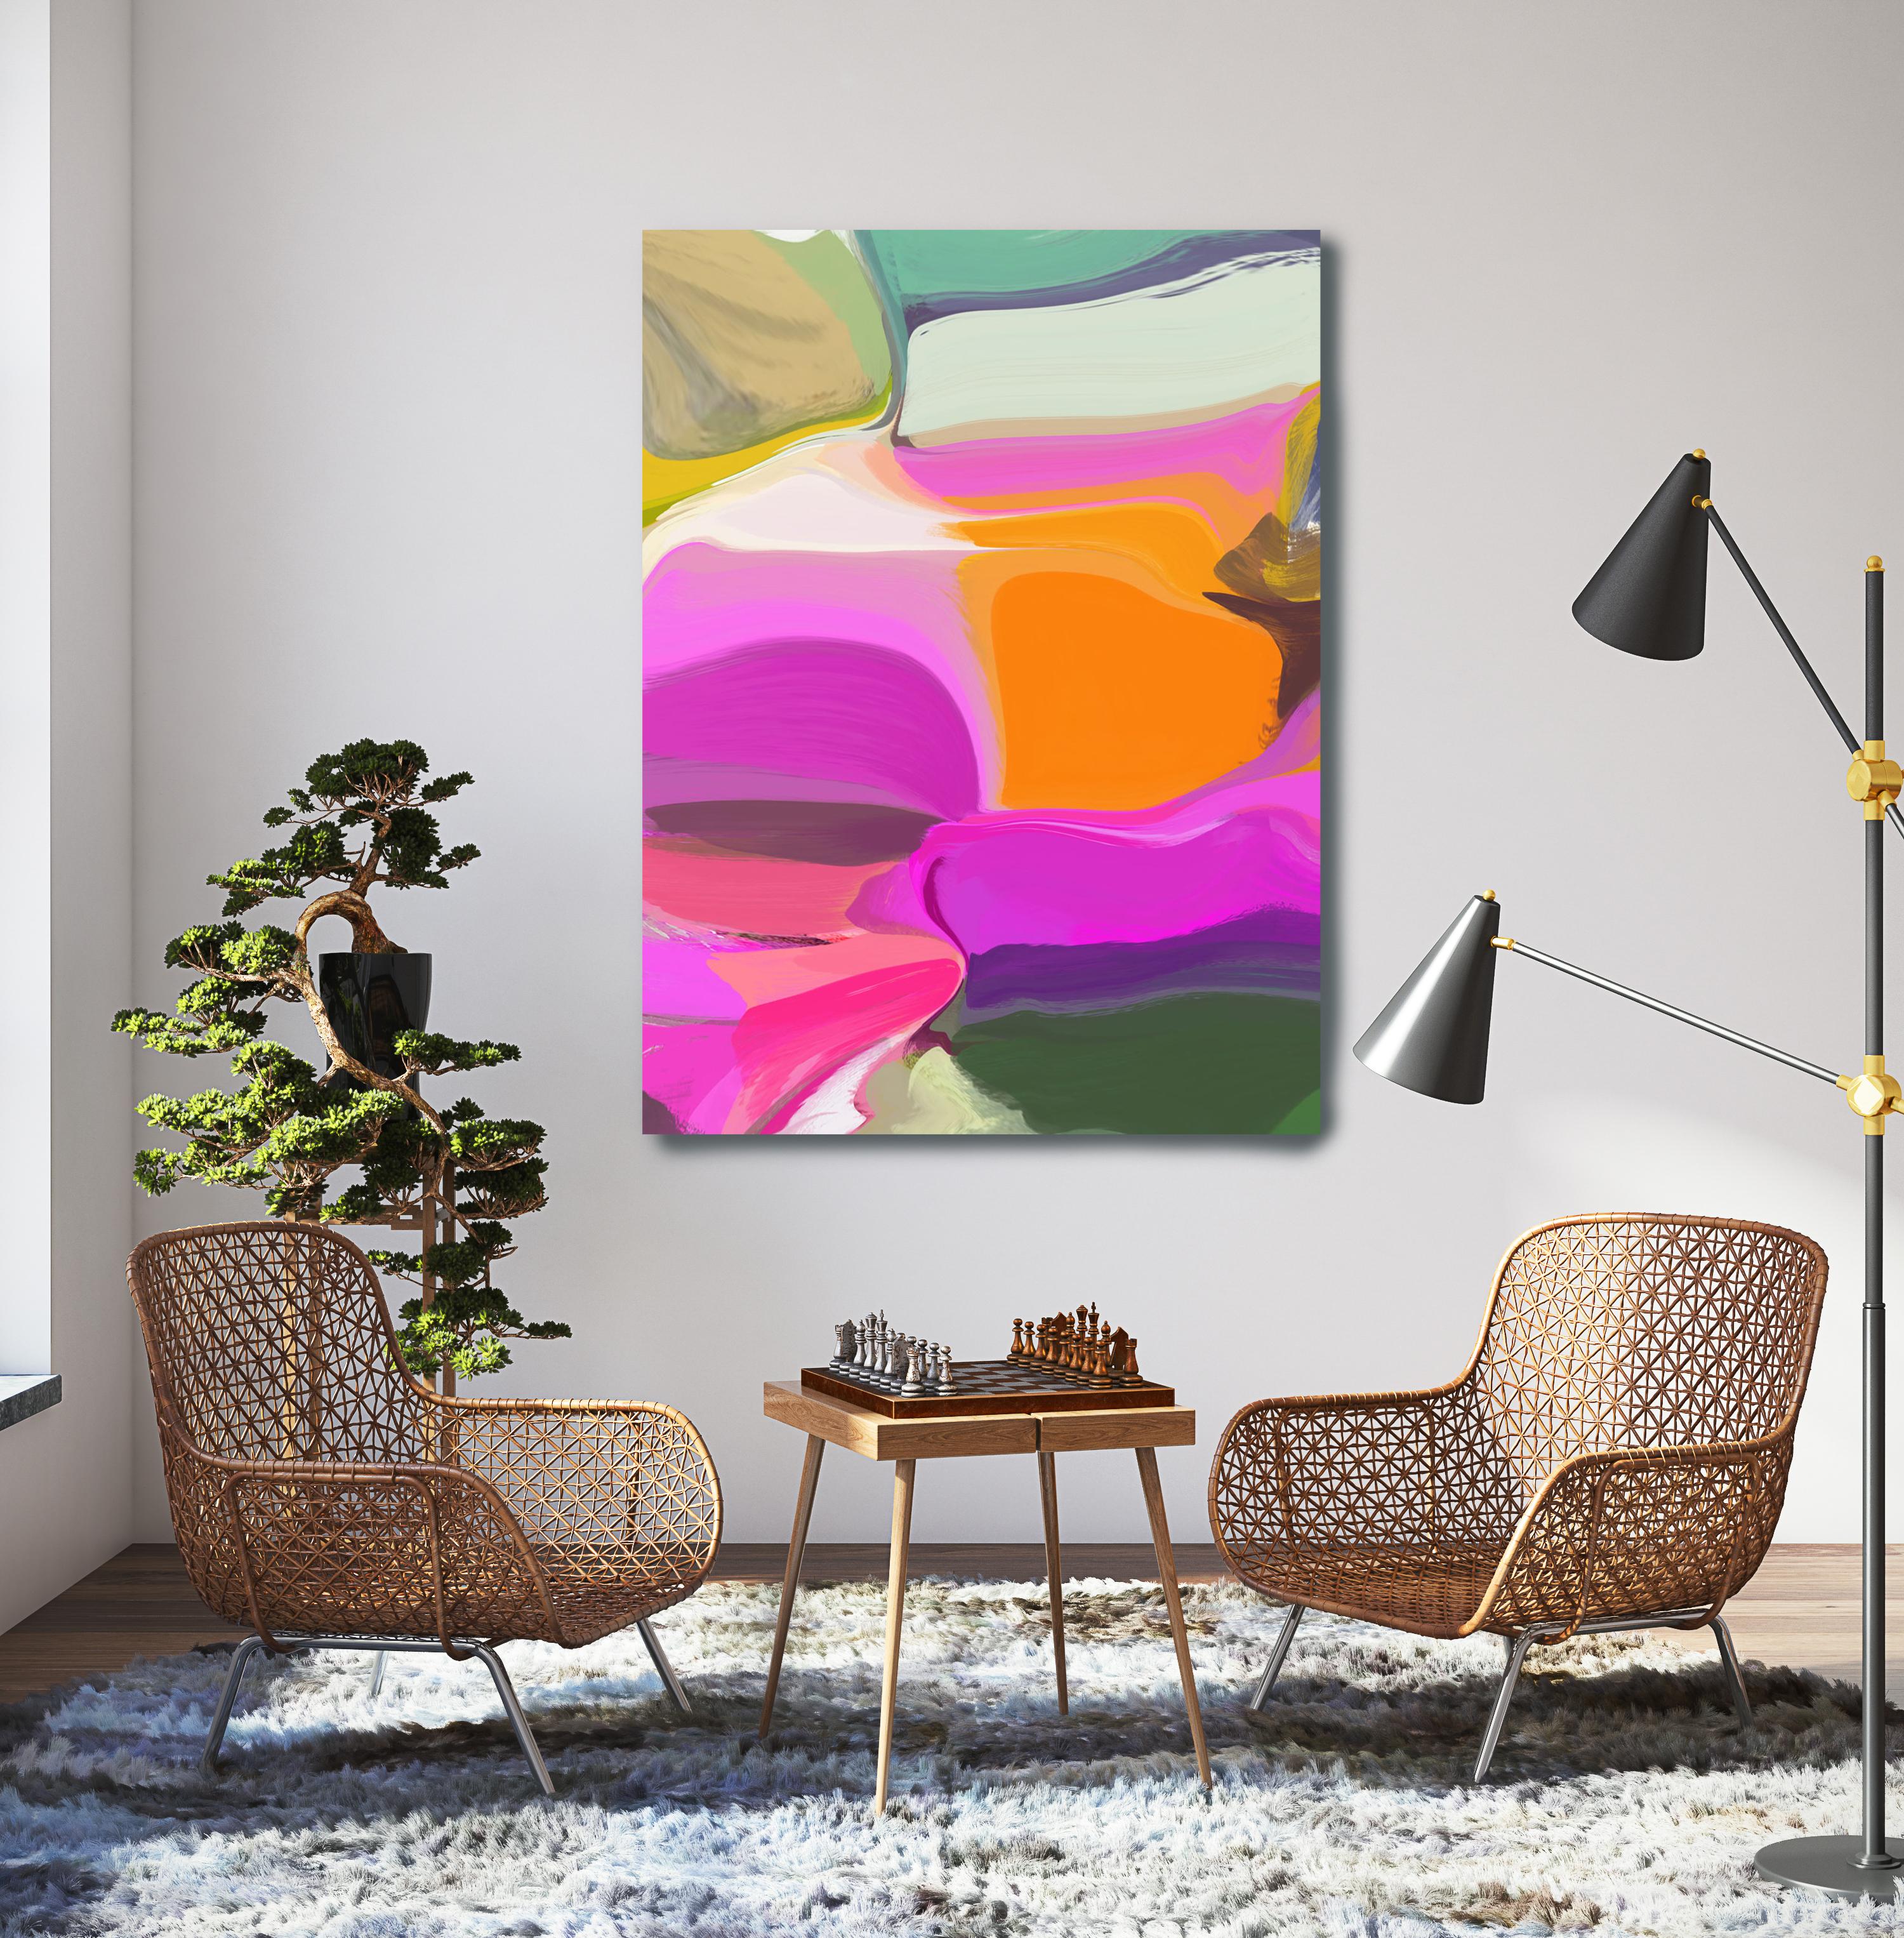 Irena Orlov Interior Painting - Electric Modern Painting Art Textured Giclee on Canvas 40x60" Sunday Morning